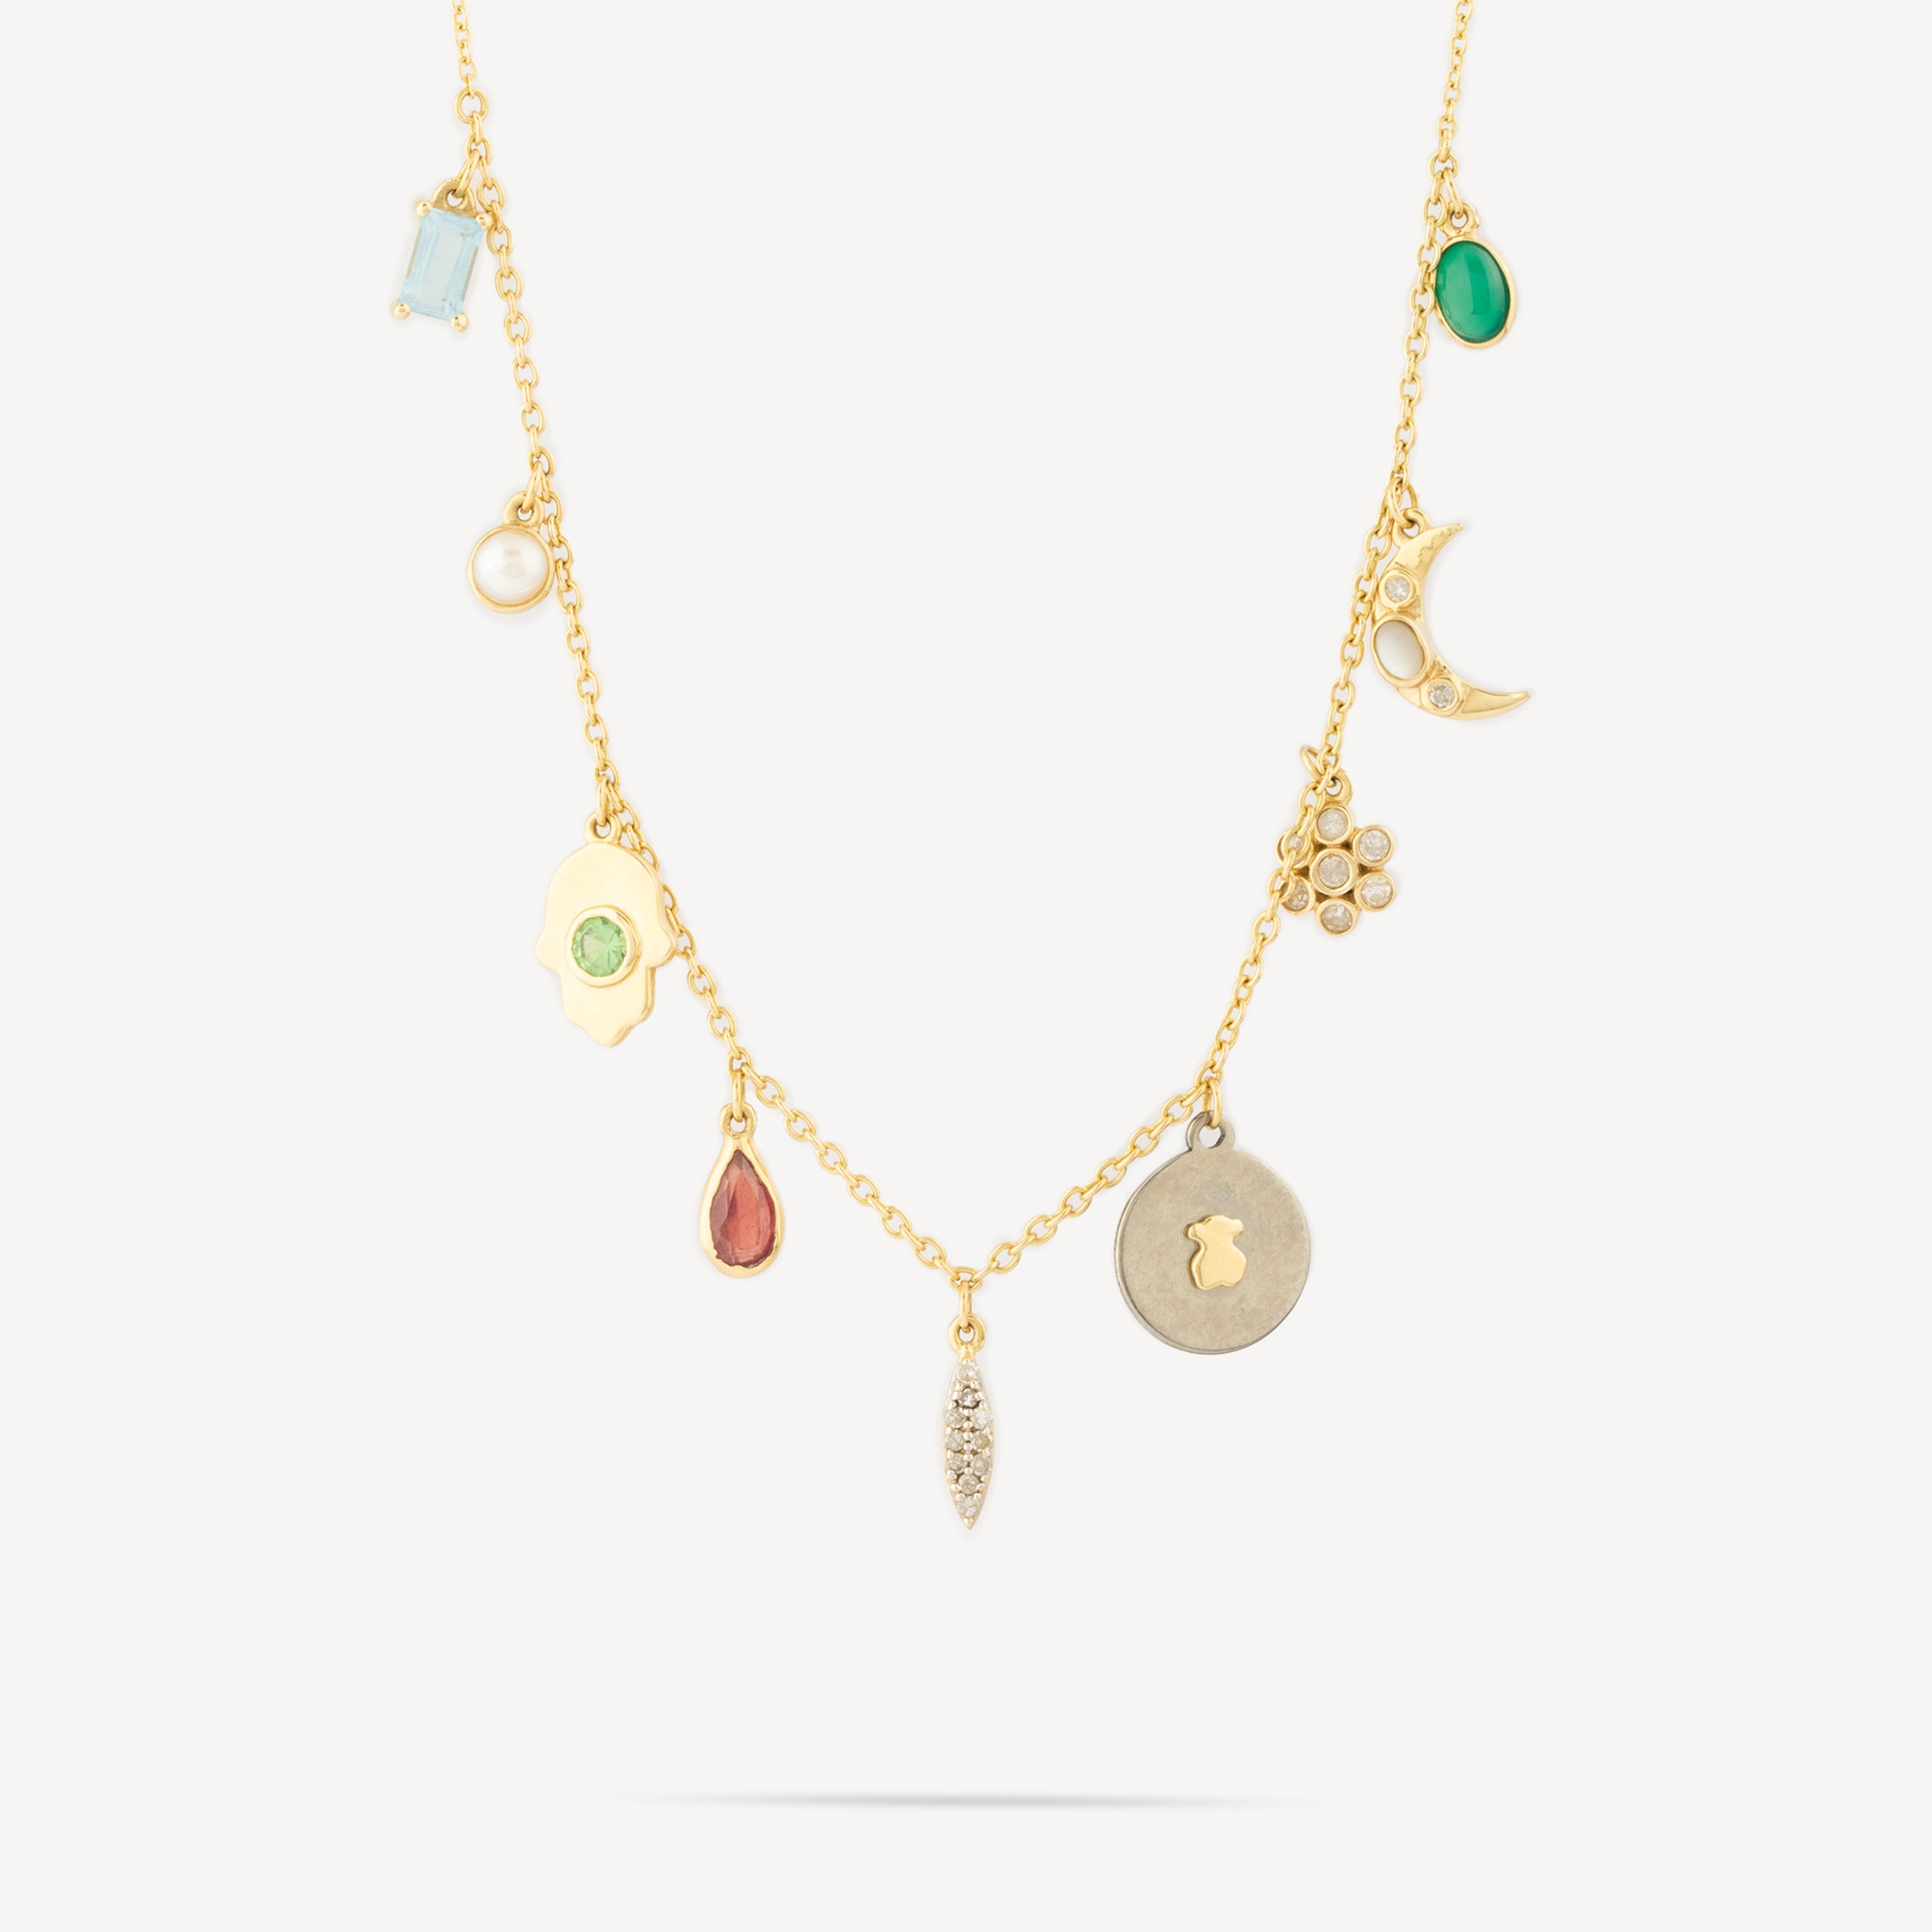 Gold gem power necklace - Tous - Stone necklaces - Mad Lords